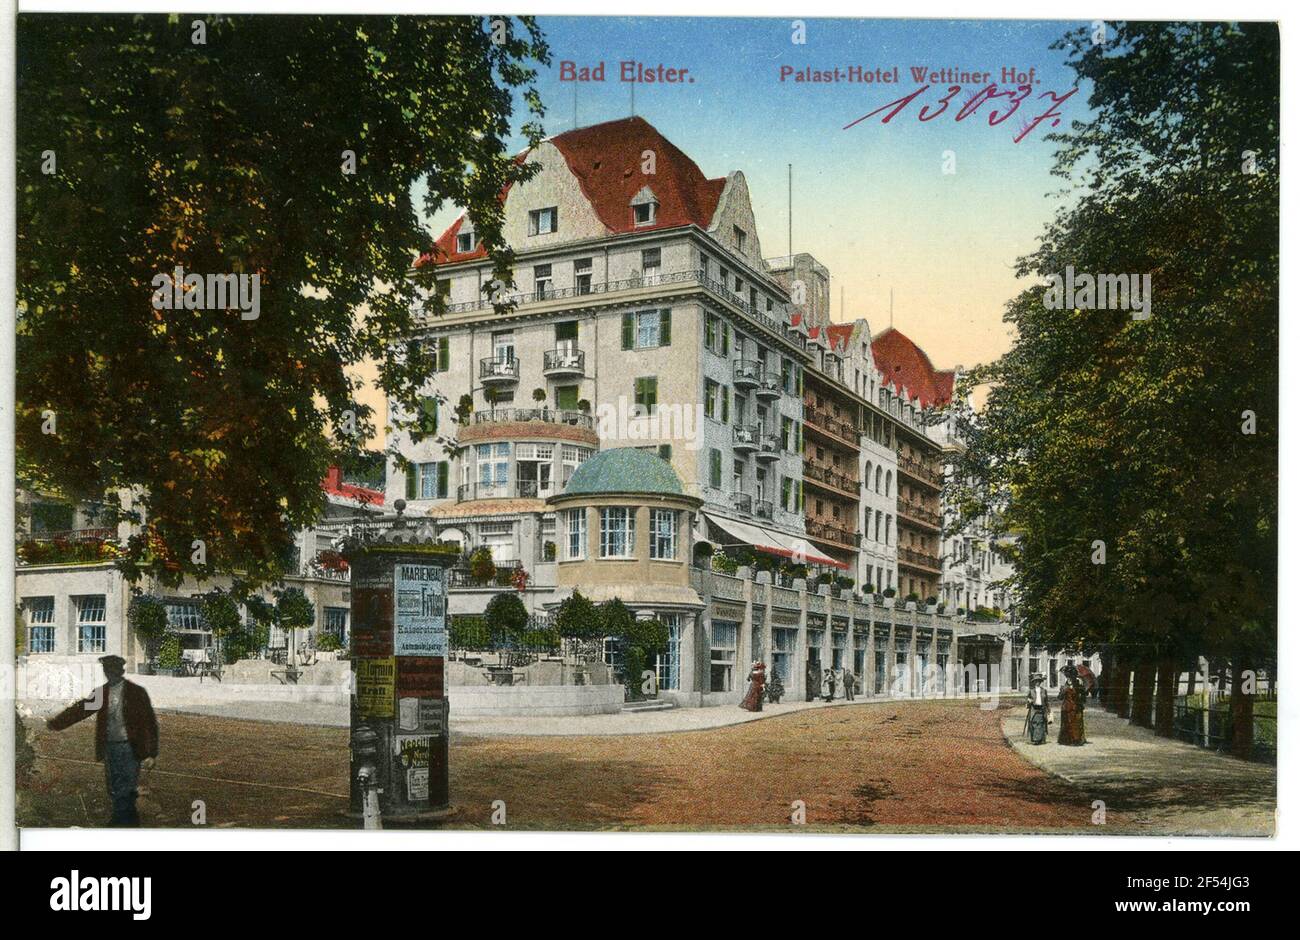 Palasthotel - Wettiner Hoh Bad Elster. Palace Hotel - Wettiner Hoh Foto Stock